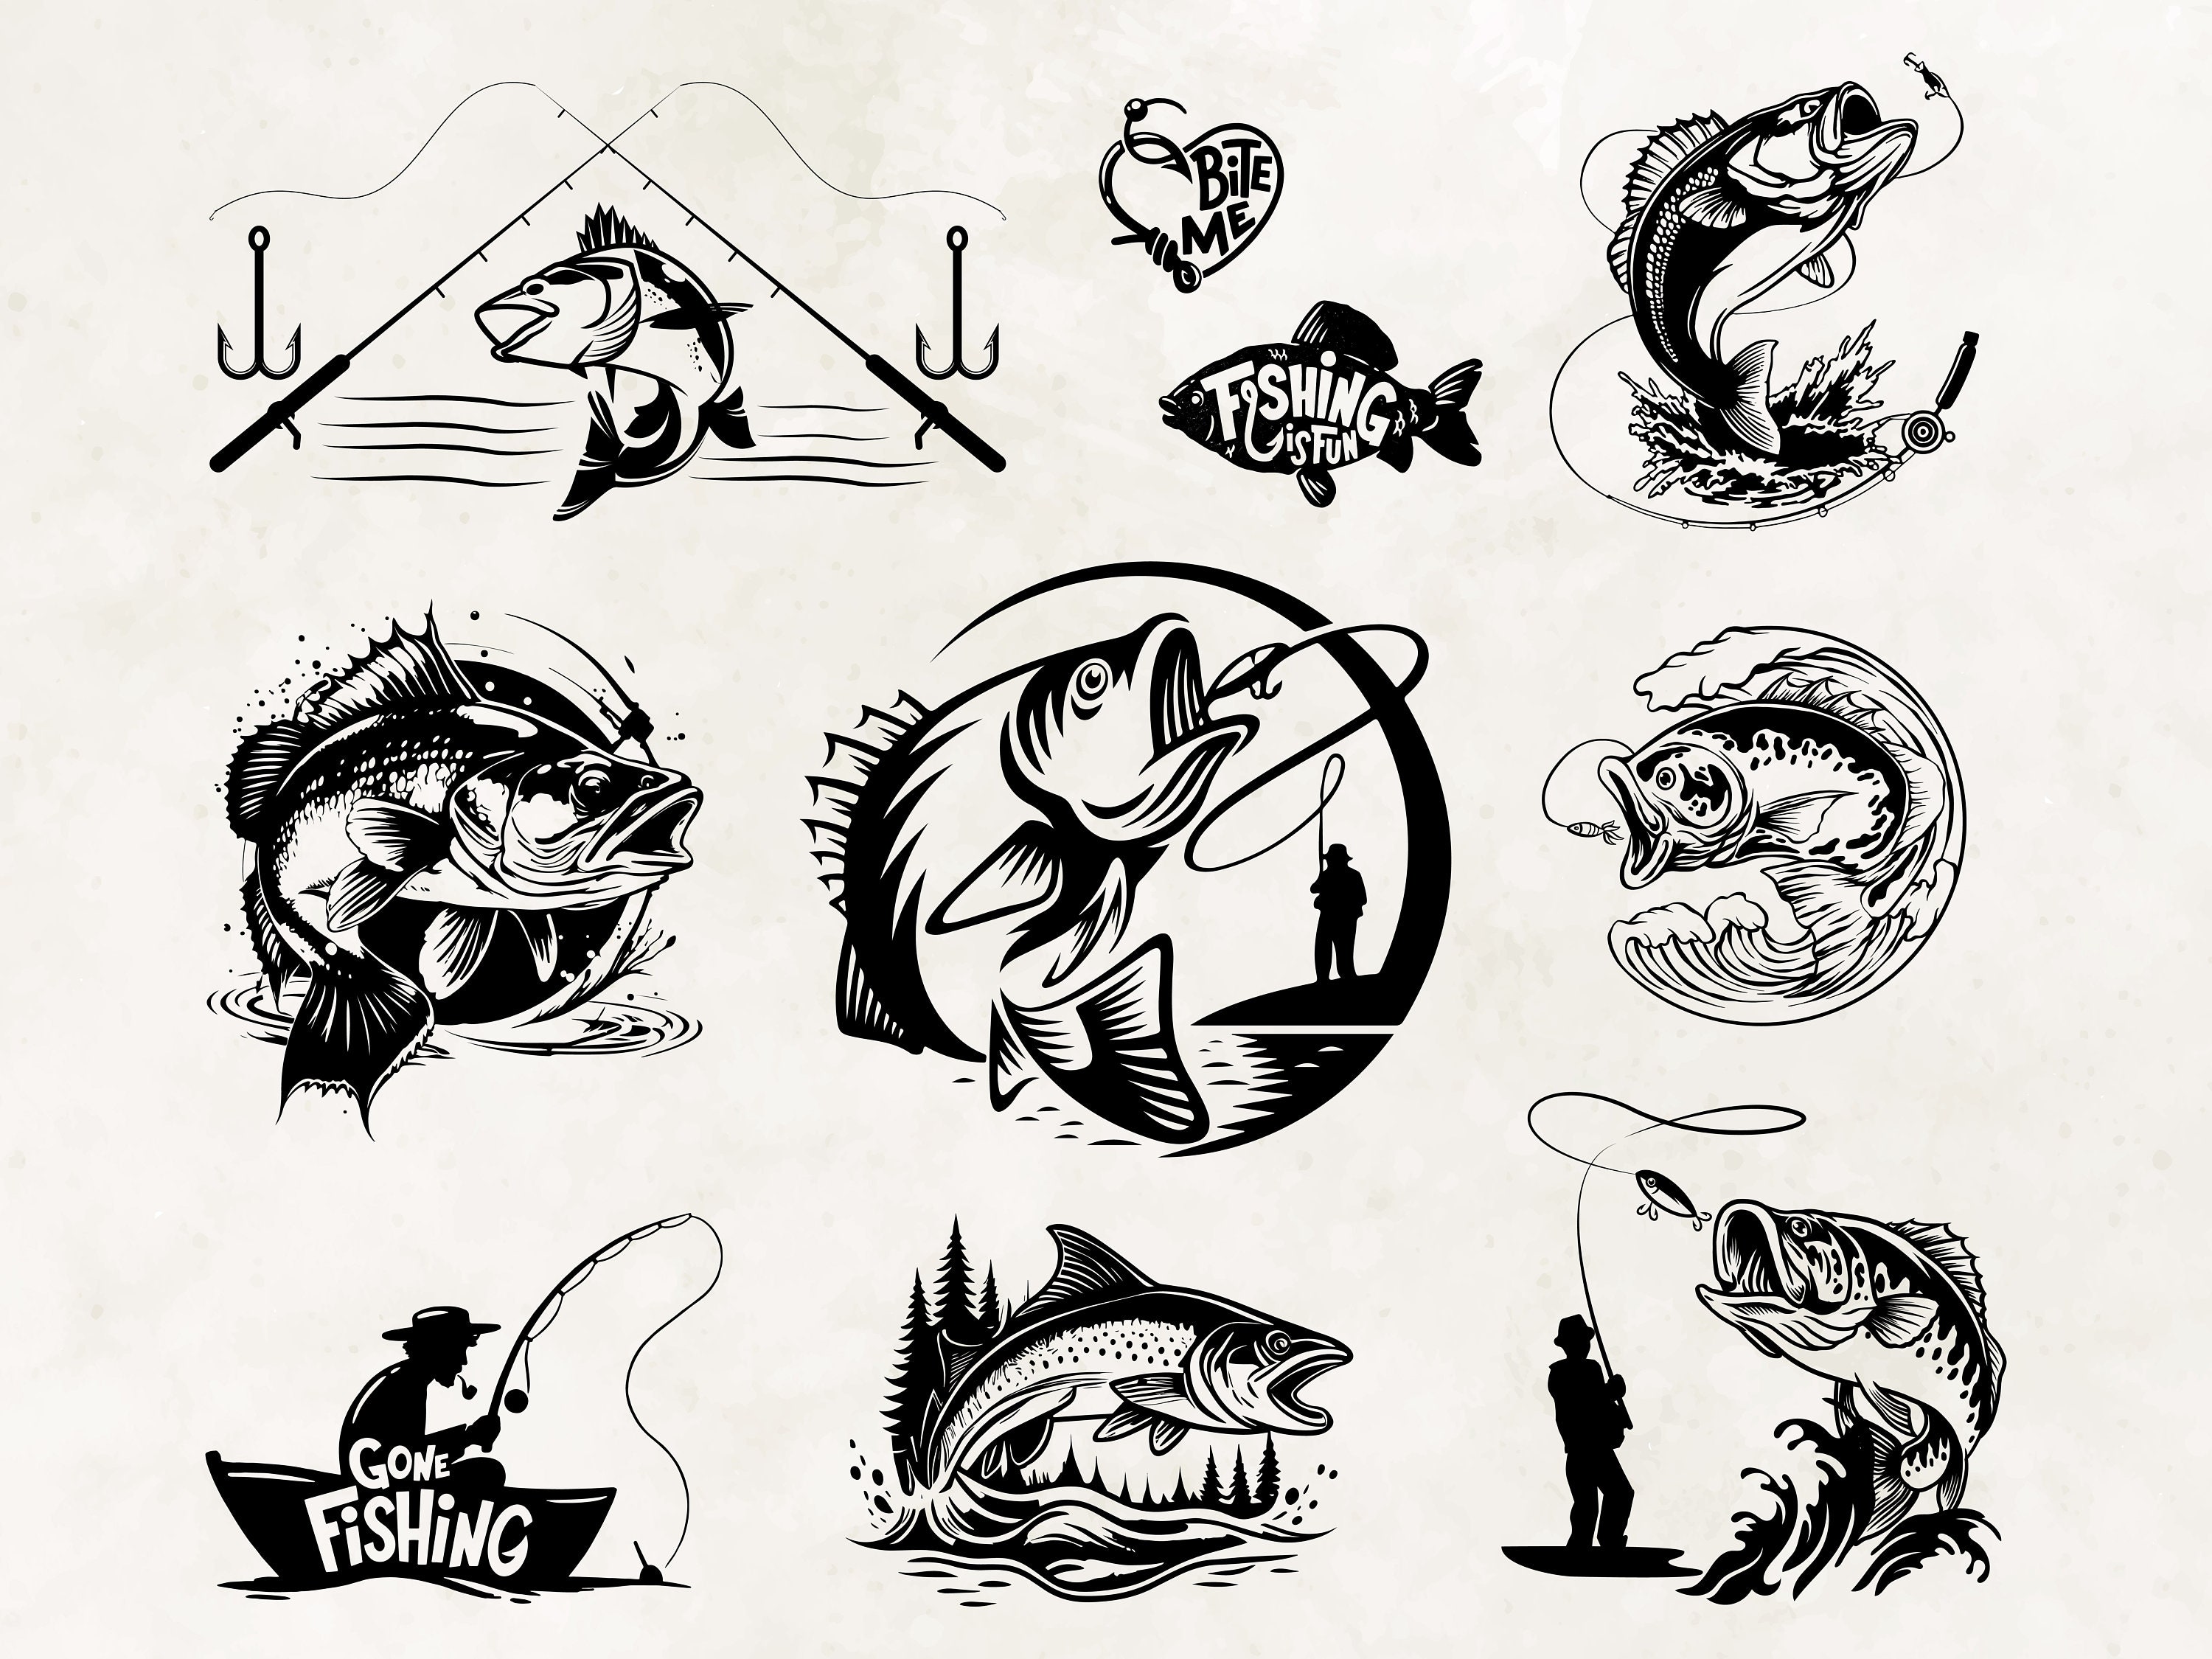 Hook, Line, & Sinker FISHING Clipart, 29 Png Clipart Files, Instant  Download Fishing Rod Reel Fish Trout Bass Catfish Nature Pond Dragonfly -   Canada